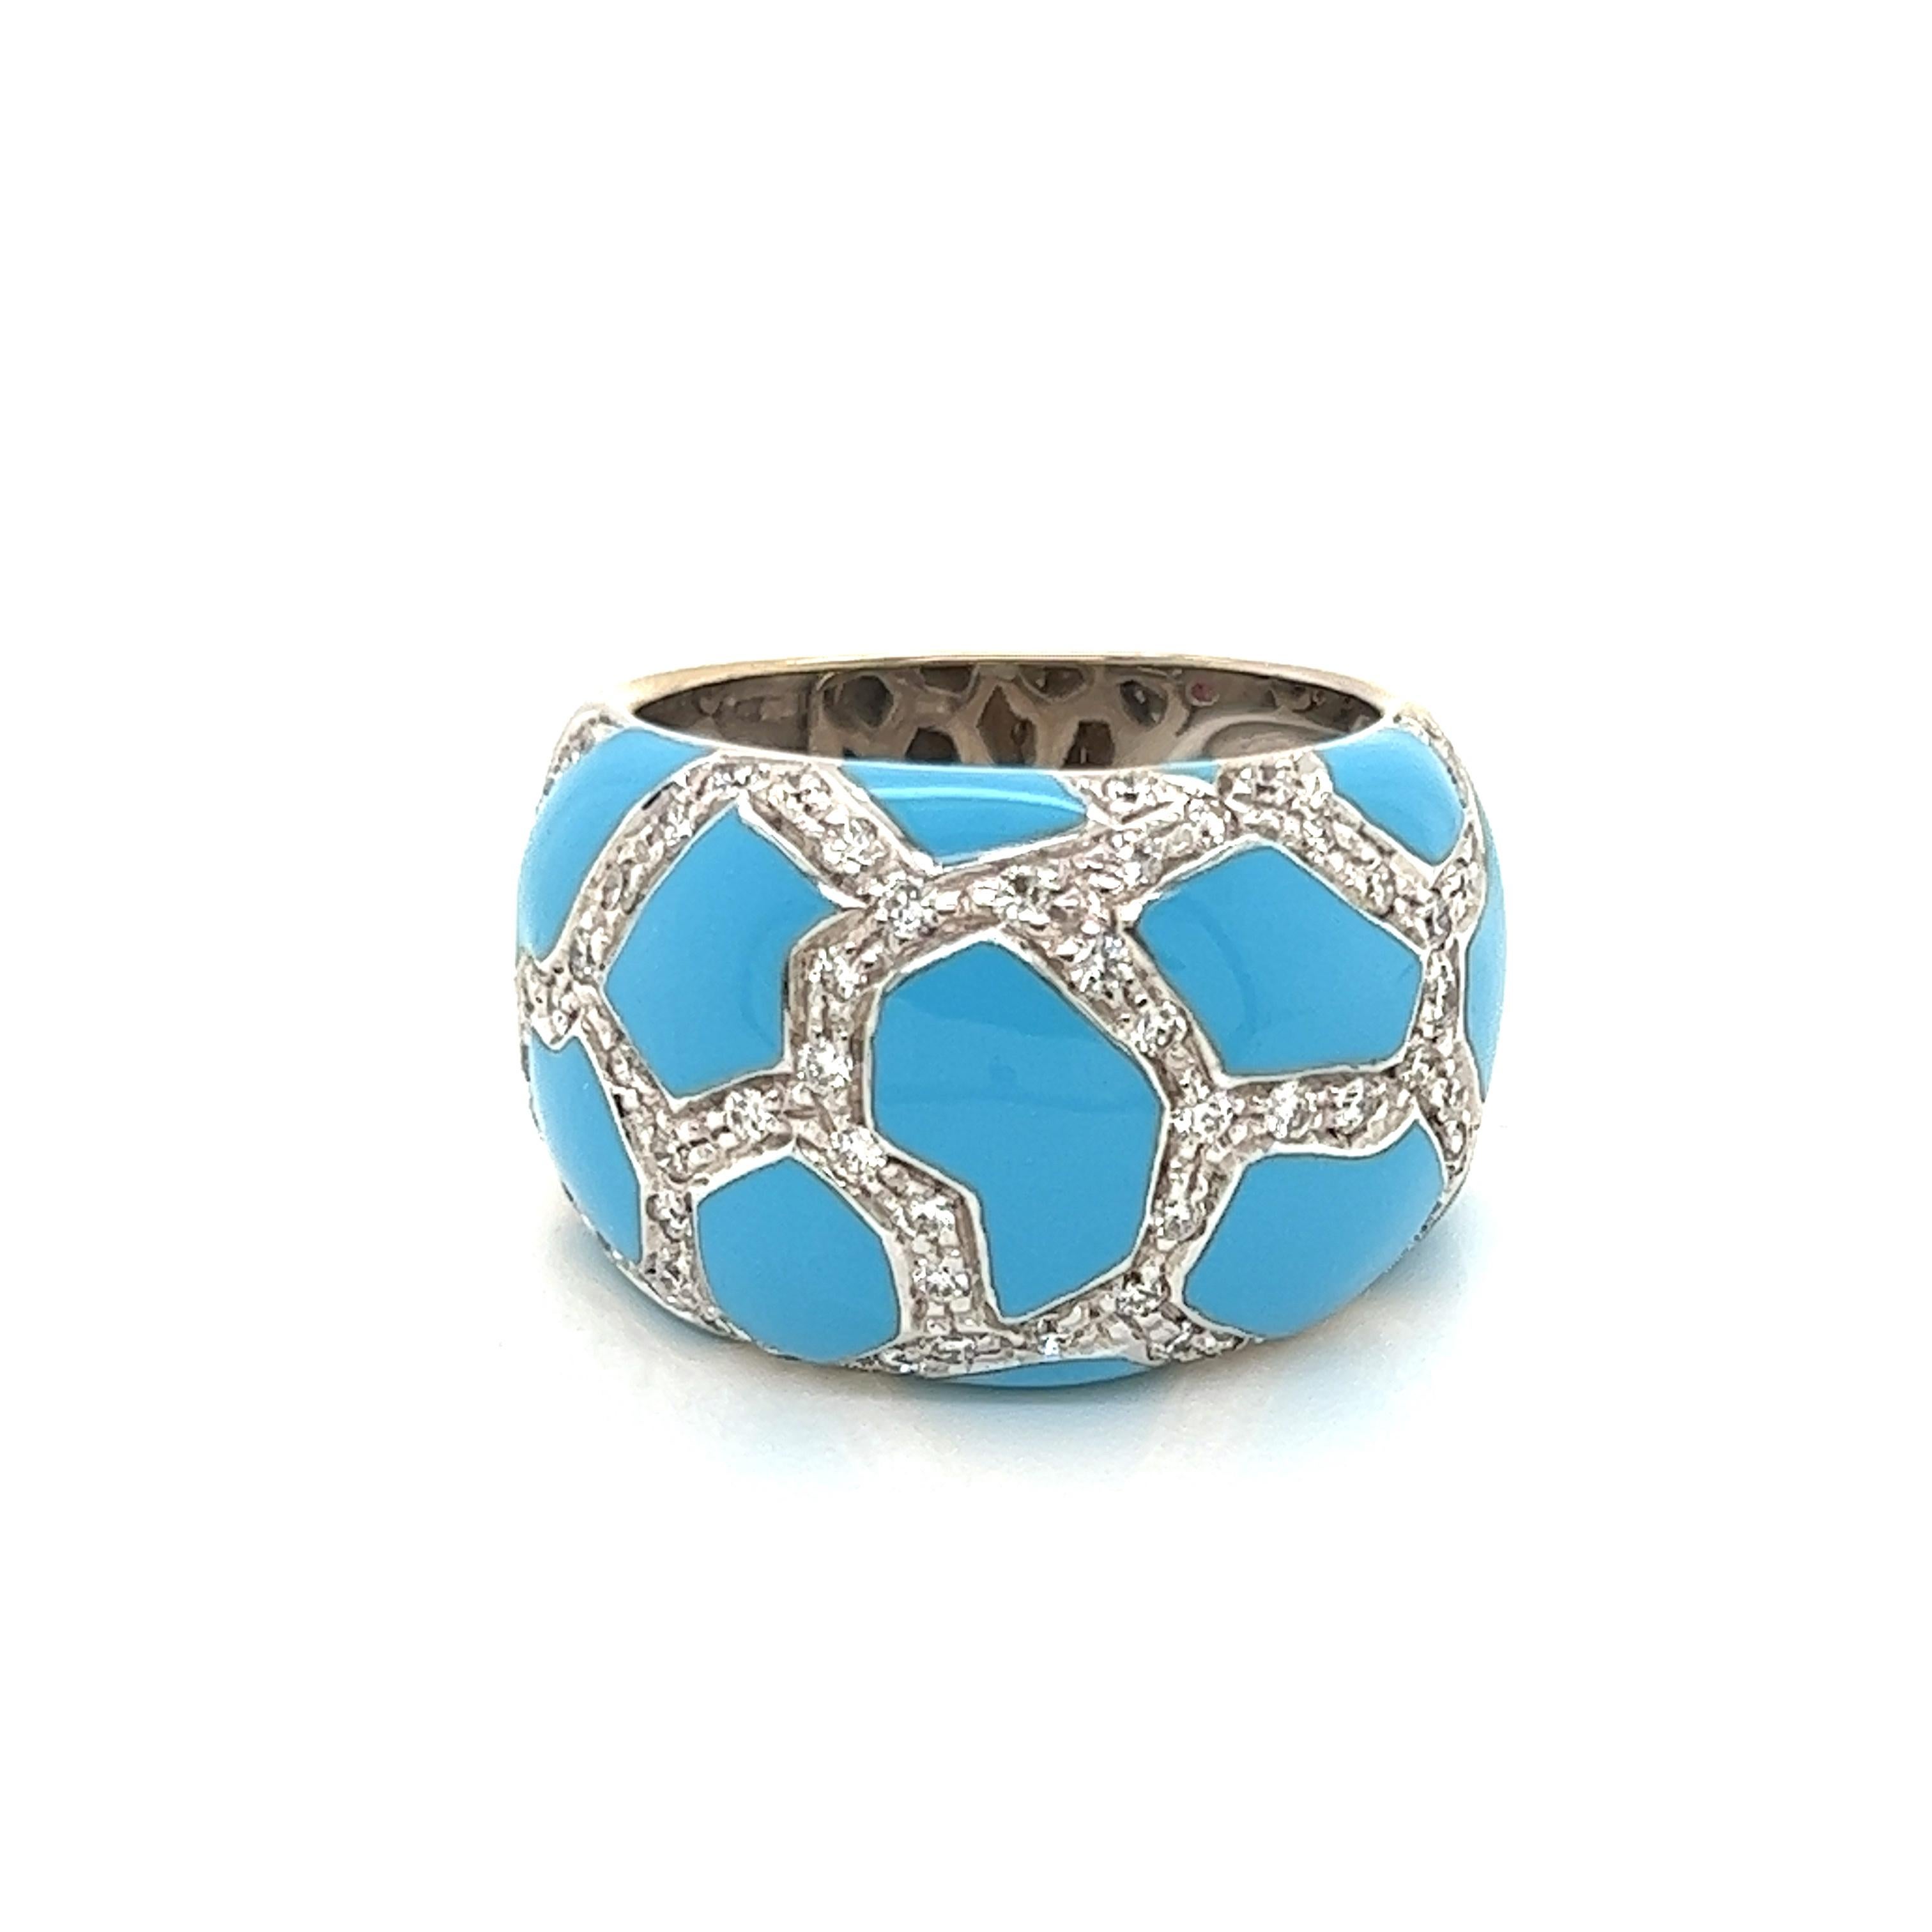 This gorgeous authentic dome band ring is by Roberto Coin, crafted from 18k white gold featuring a wide dome shape band and across the top of the band has mosaic design with turquoise inlay and with diamonds on white gold strips bordering each